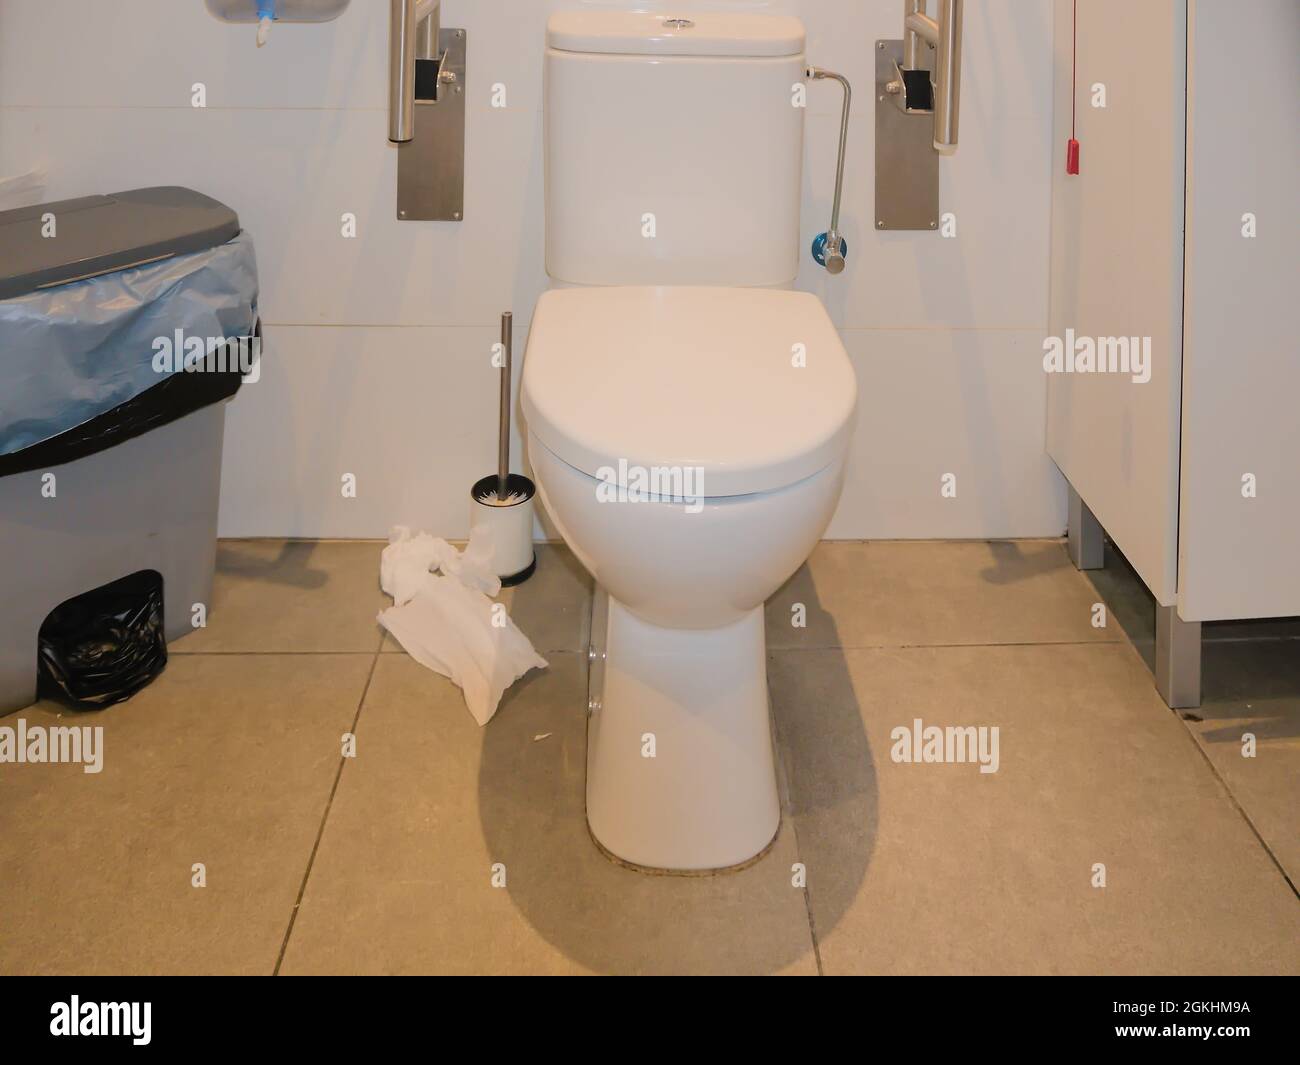 View into a public toilet, lid closed, armrests folded up against the wall. On the left of the picture there is a large trash can with garbage bags. Stock Photo